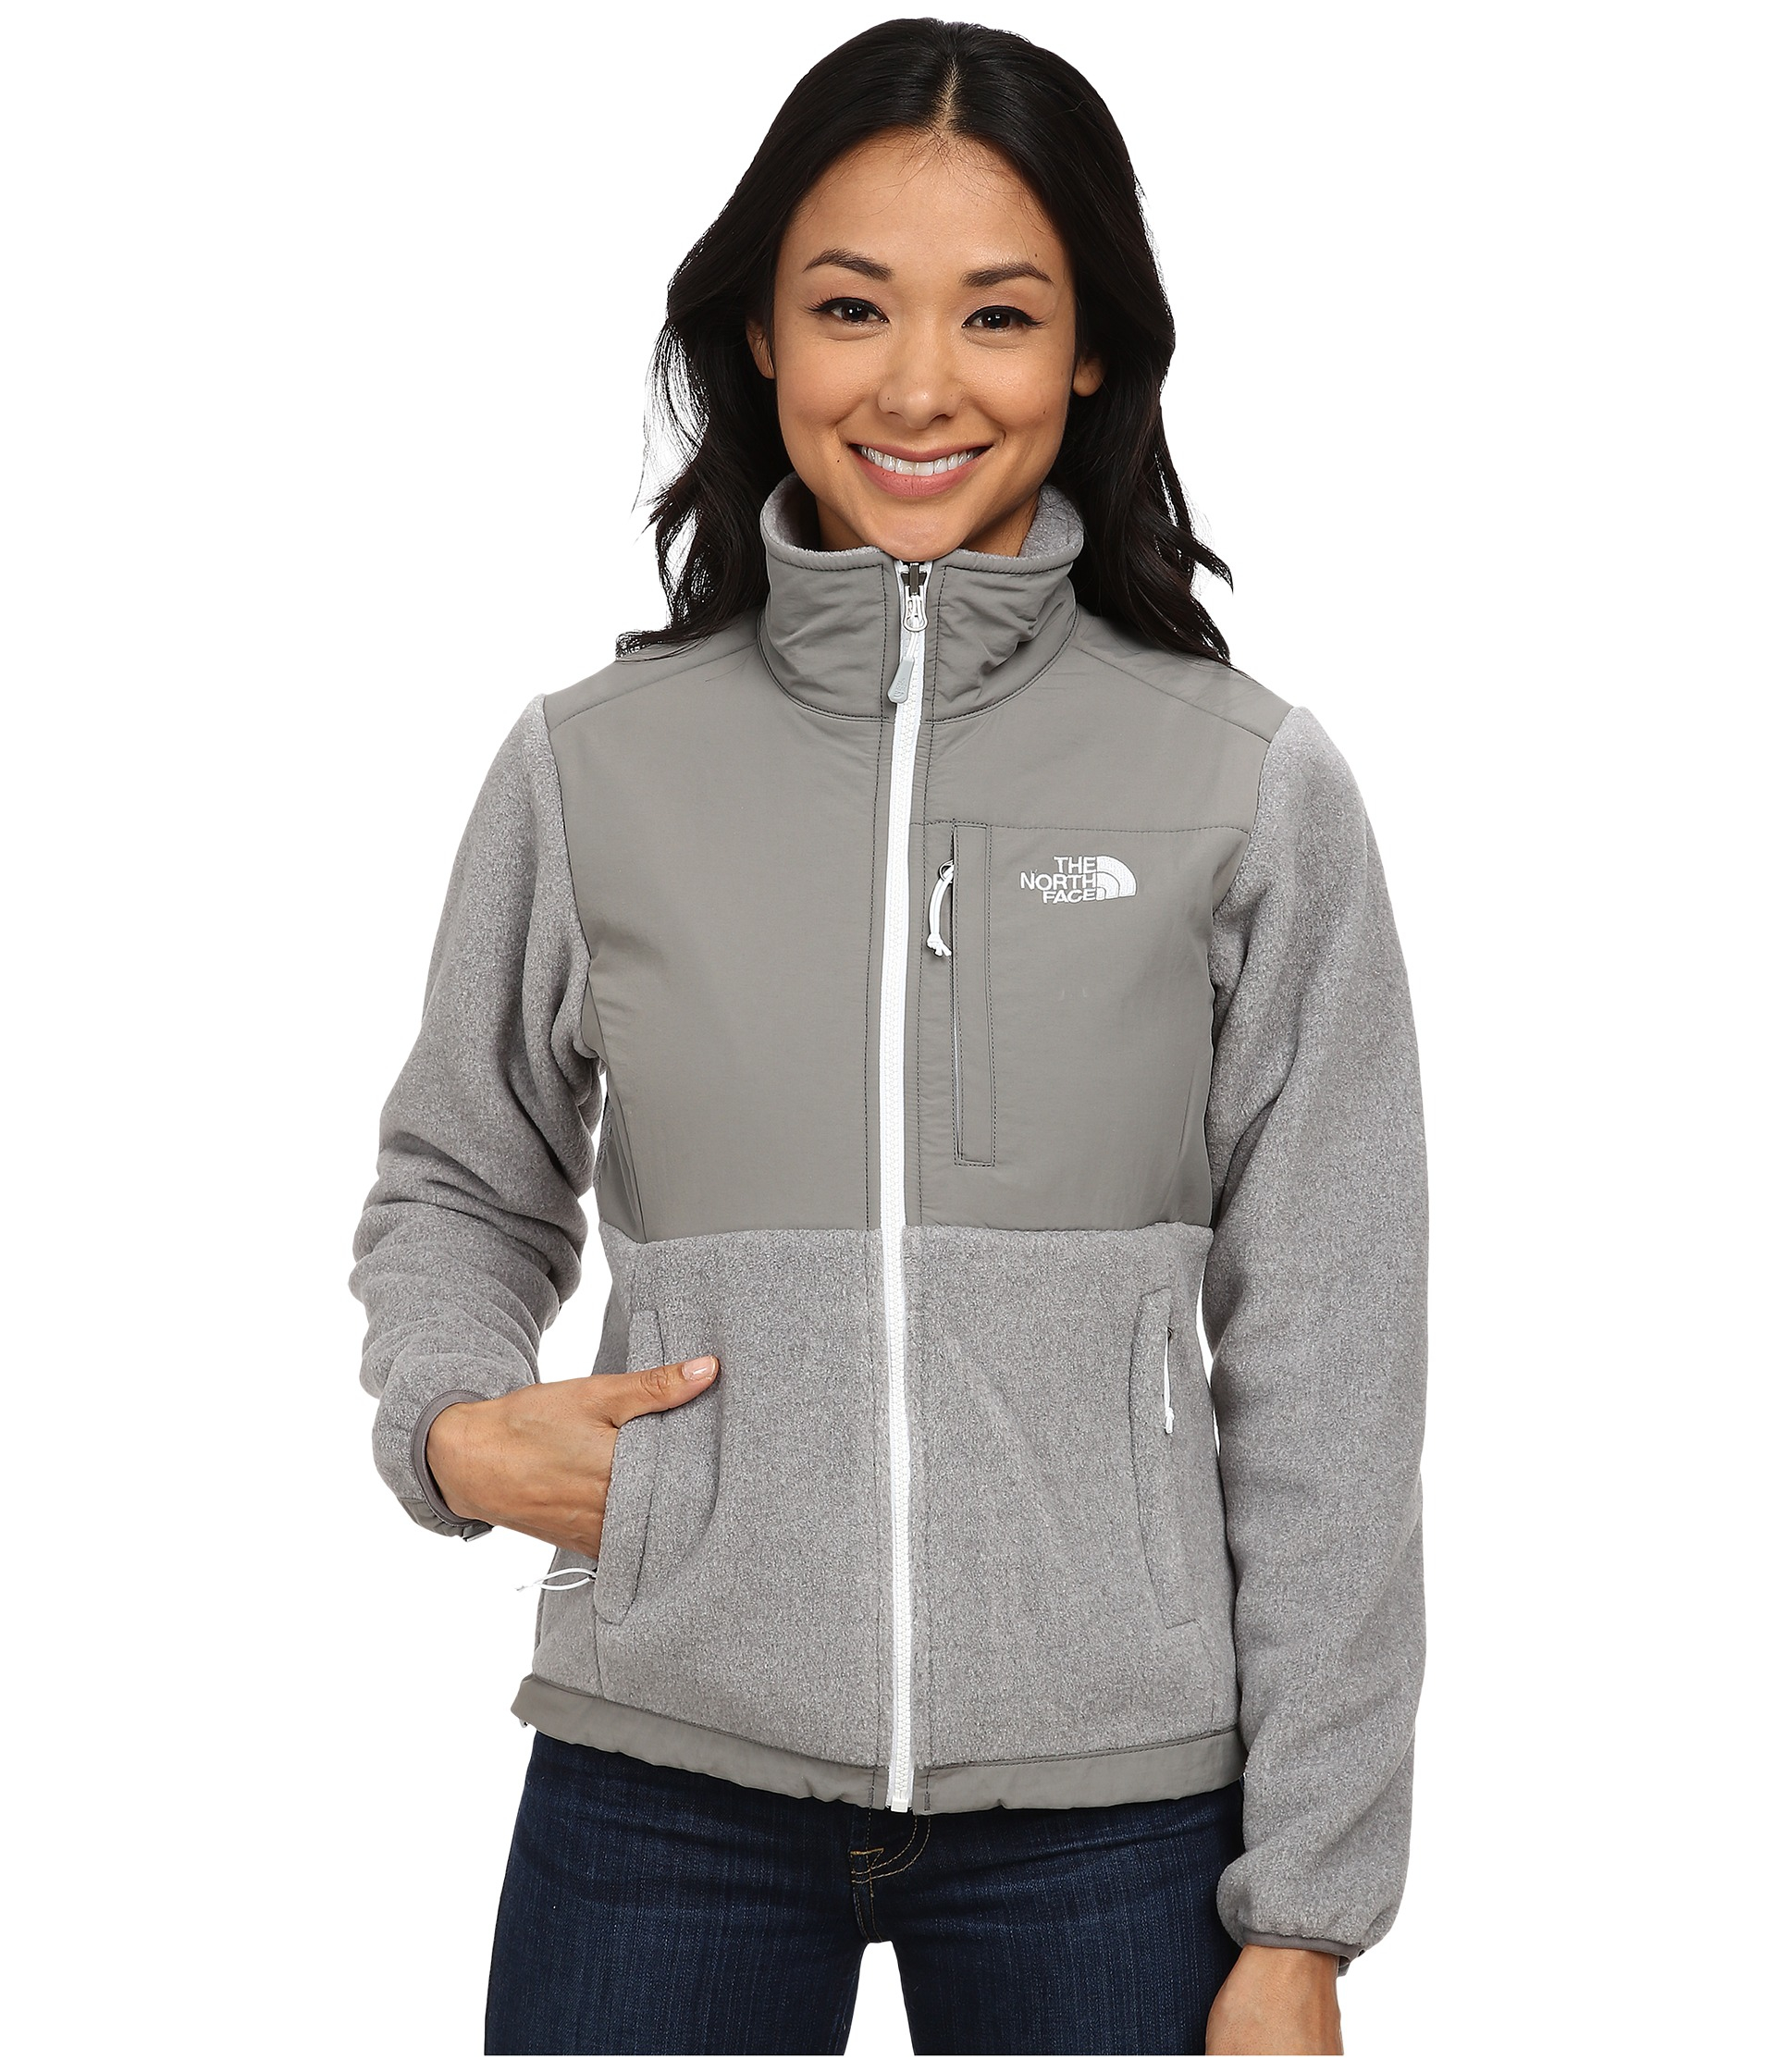 Lyst - The North Face Denali Jacket in Gray